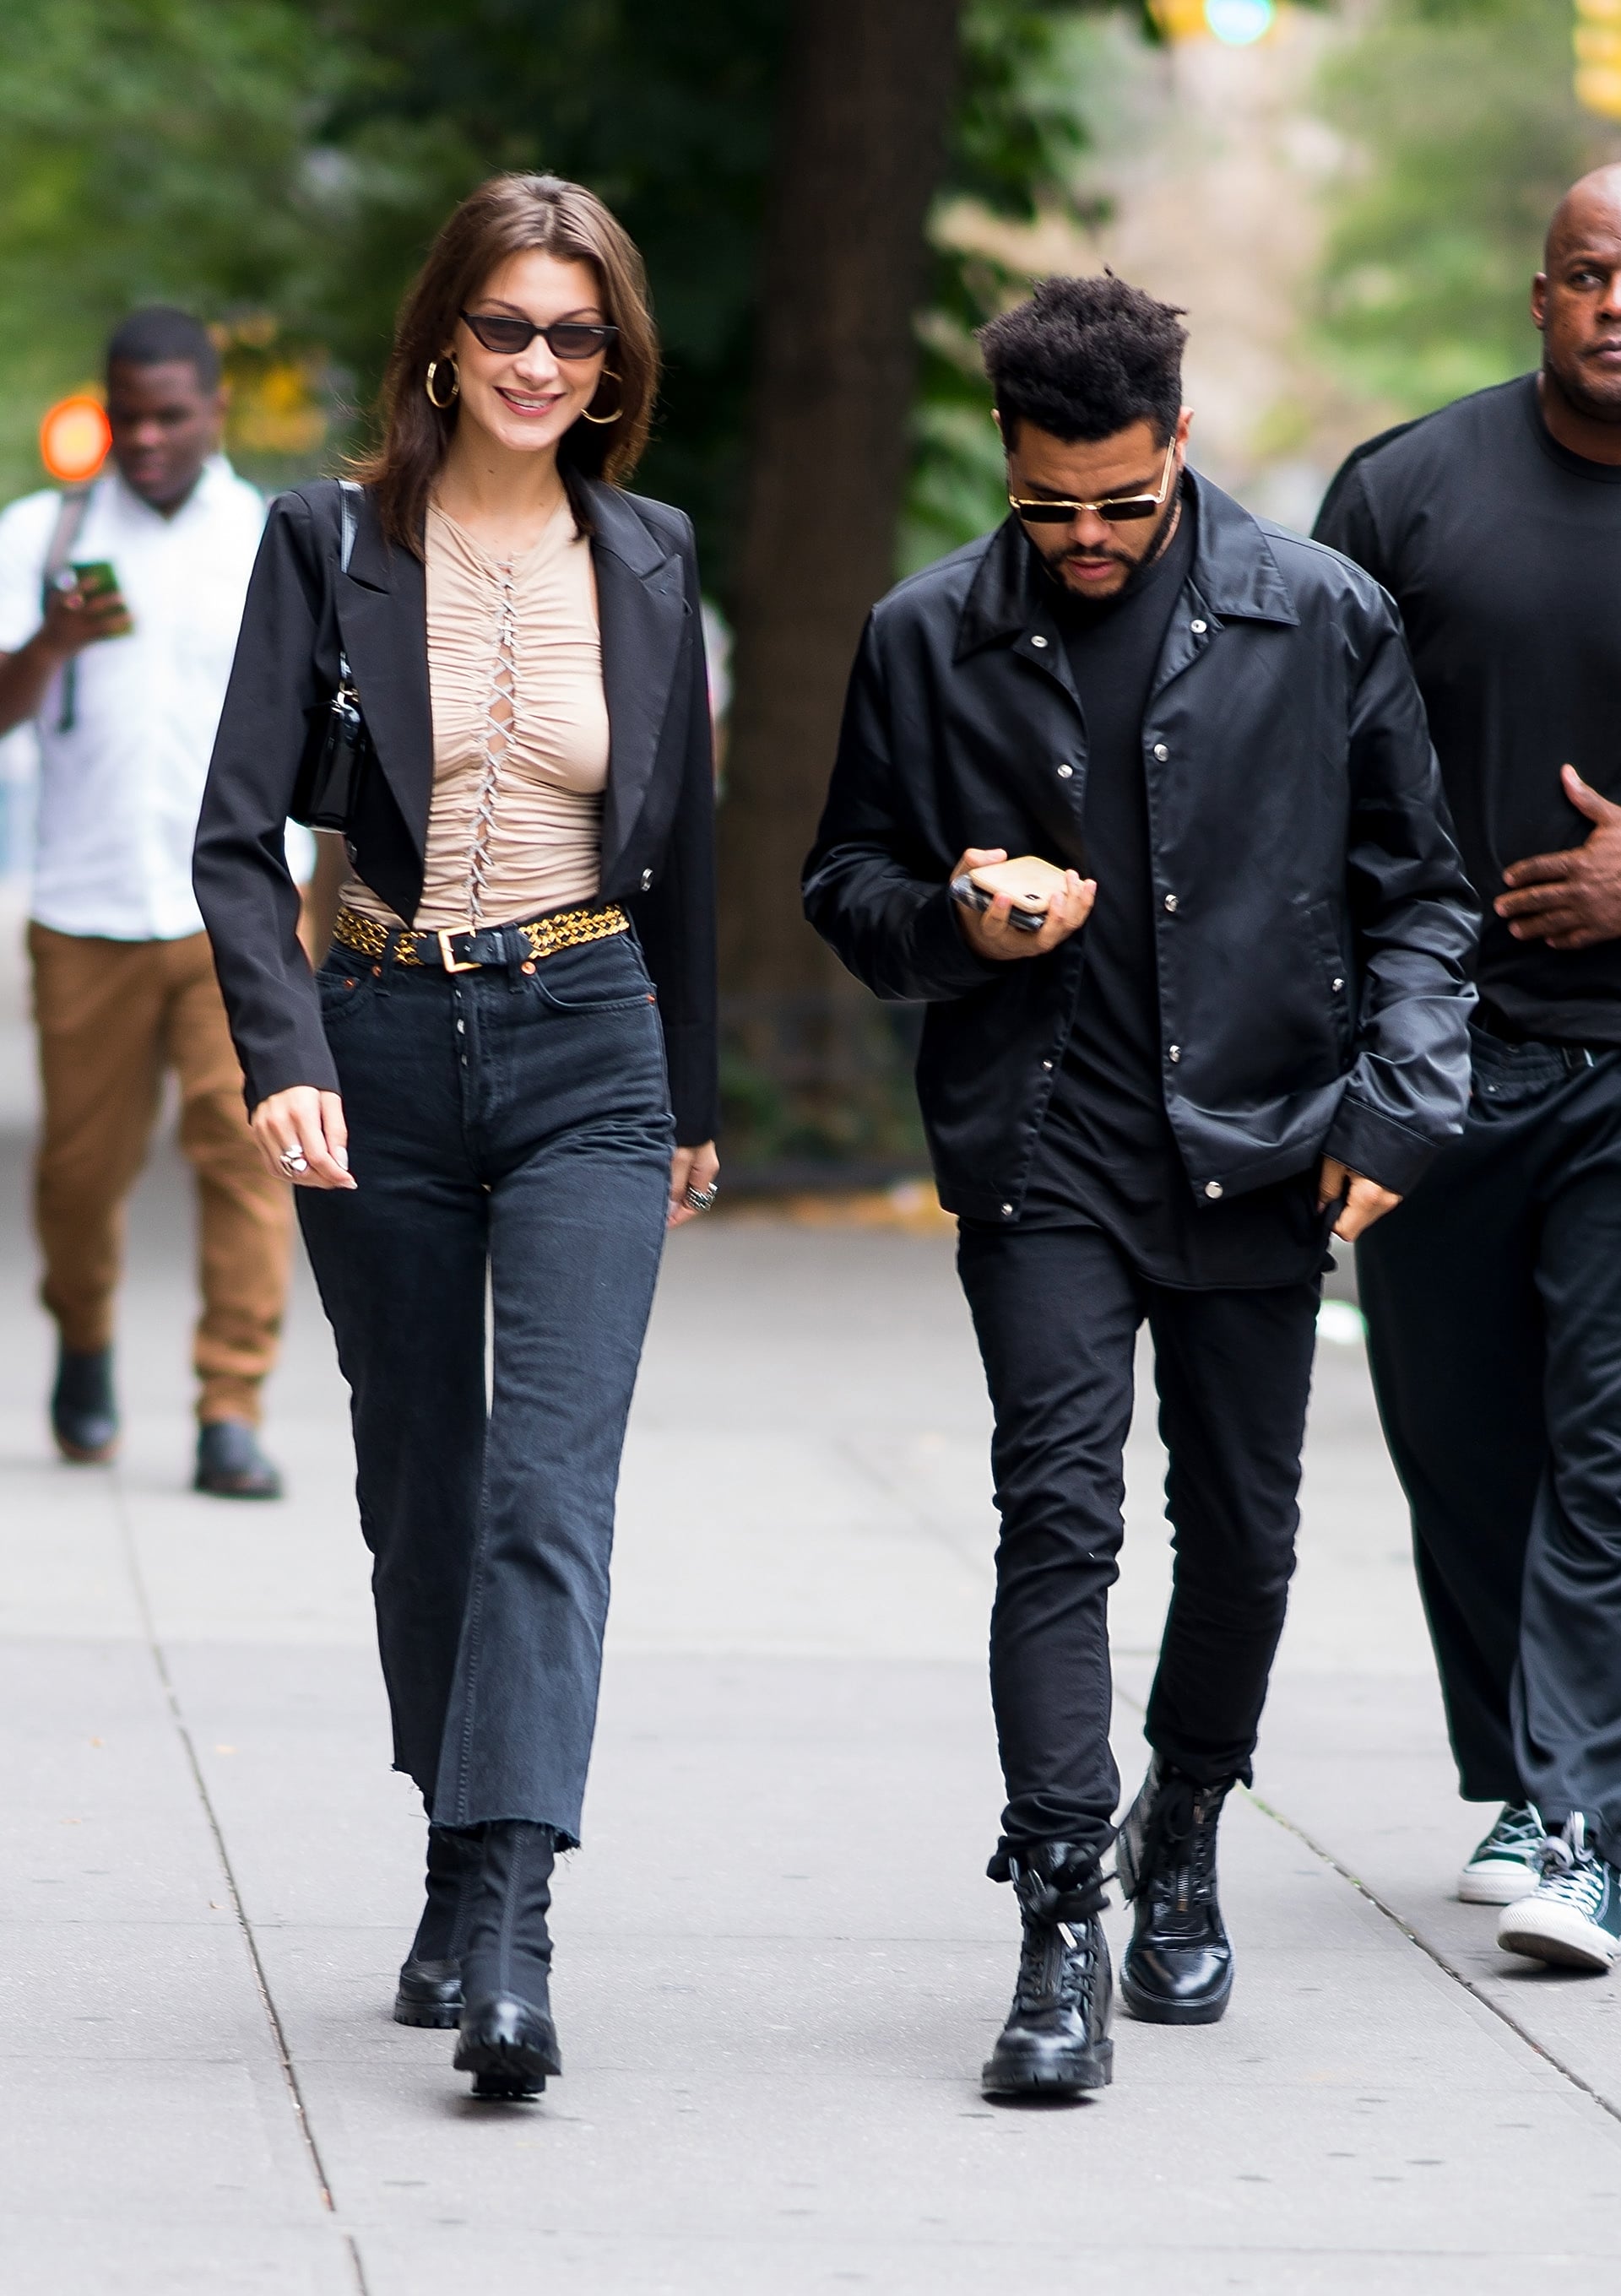 Fashion, Shopping Style | Bella Hadid's B-Day Top Sexy, We Don't Blame The Weeknd For the Impromptu Smooch | POPSUGAR Fashion Photo 16